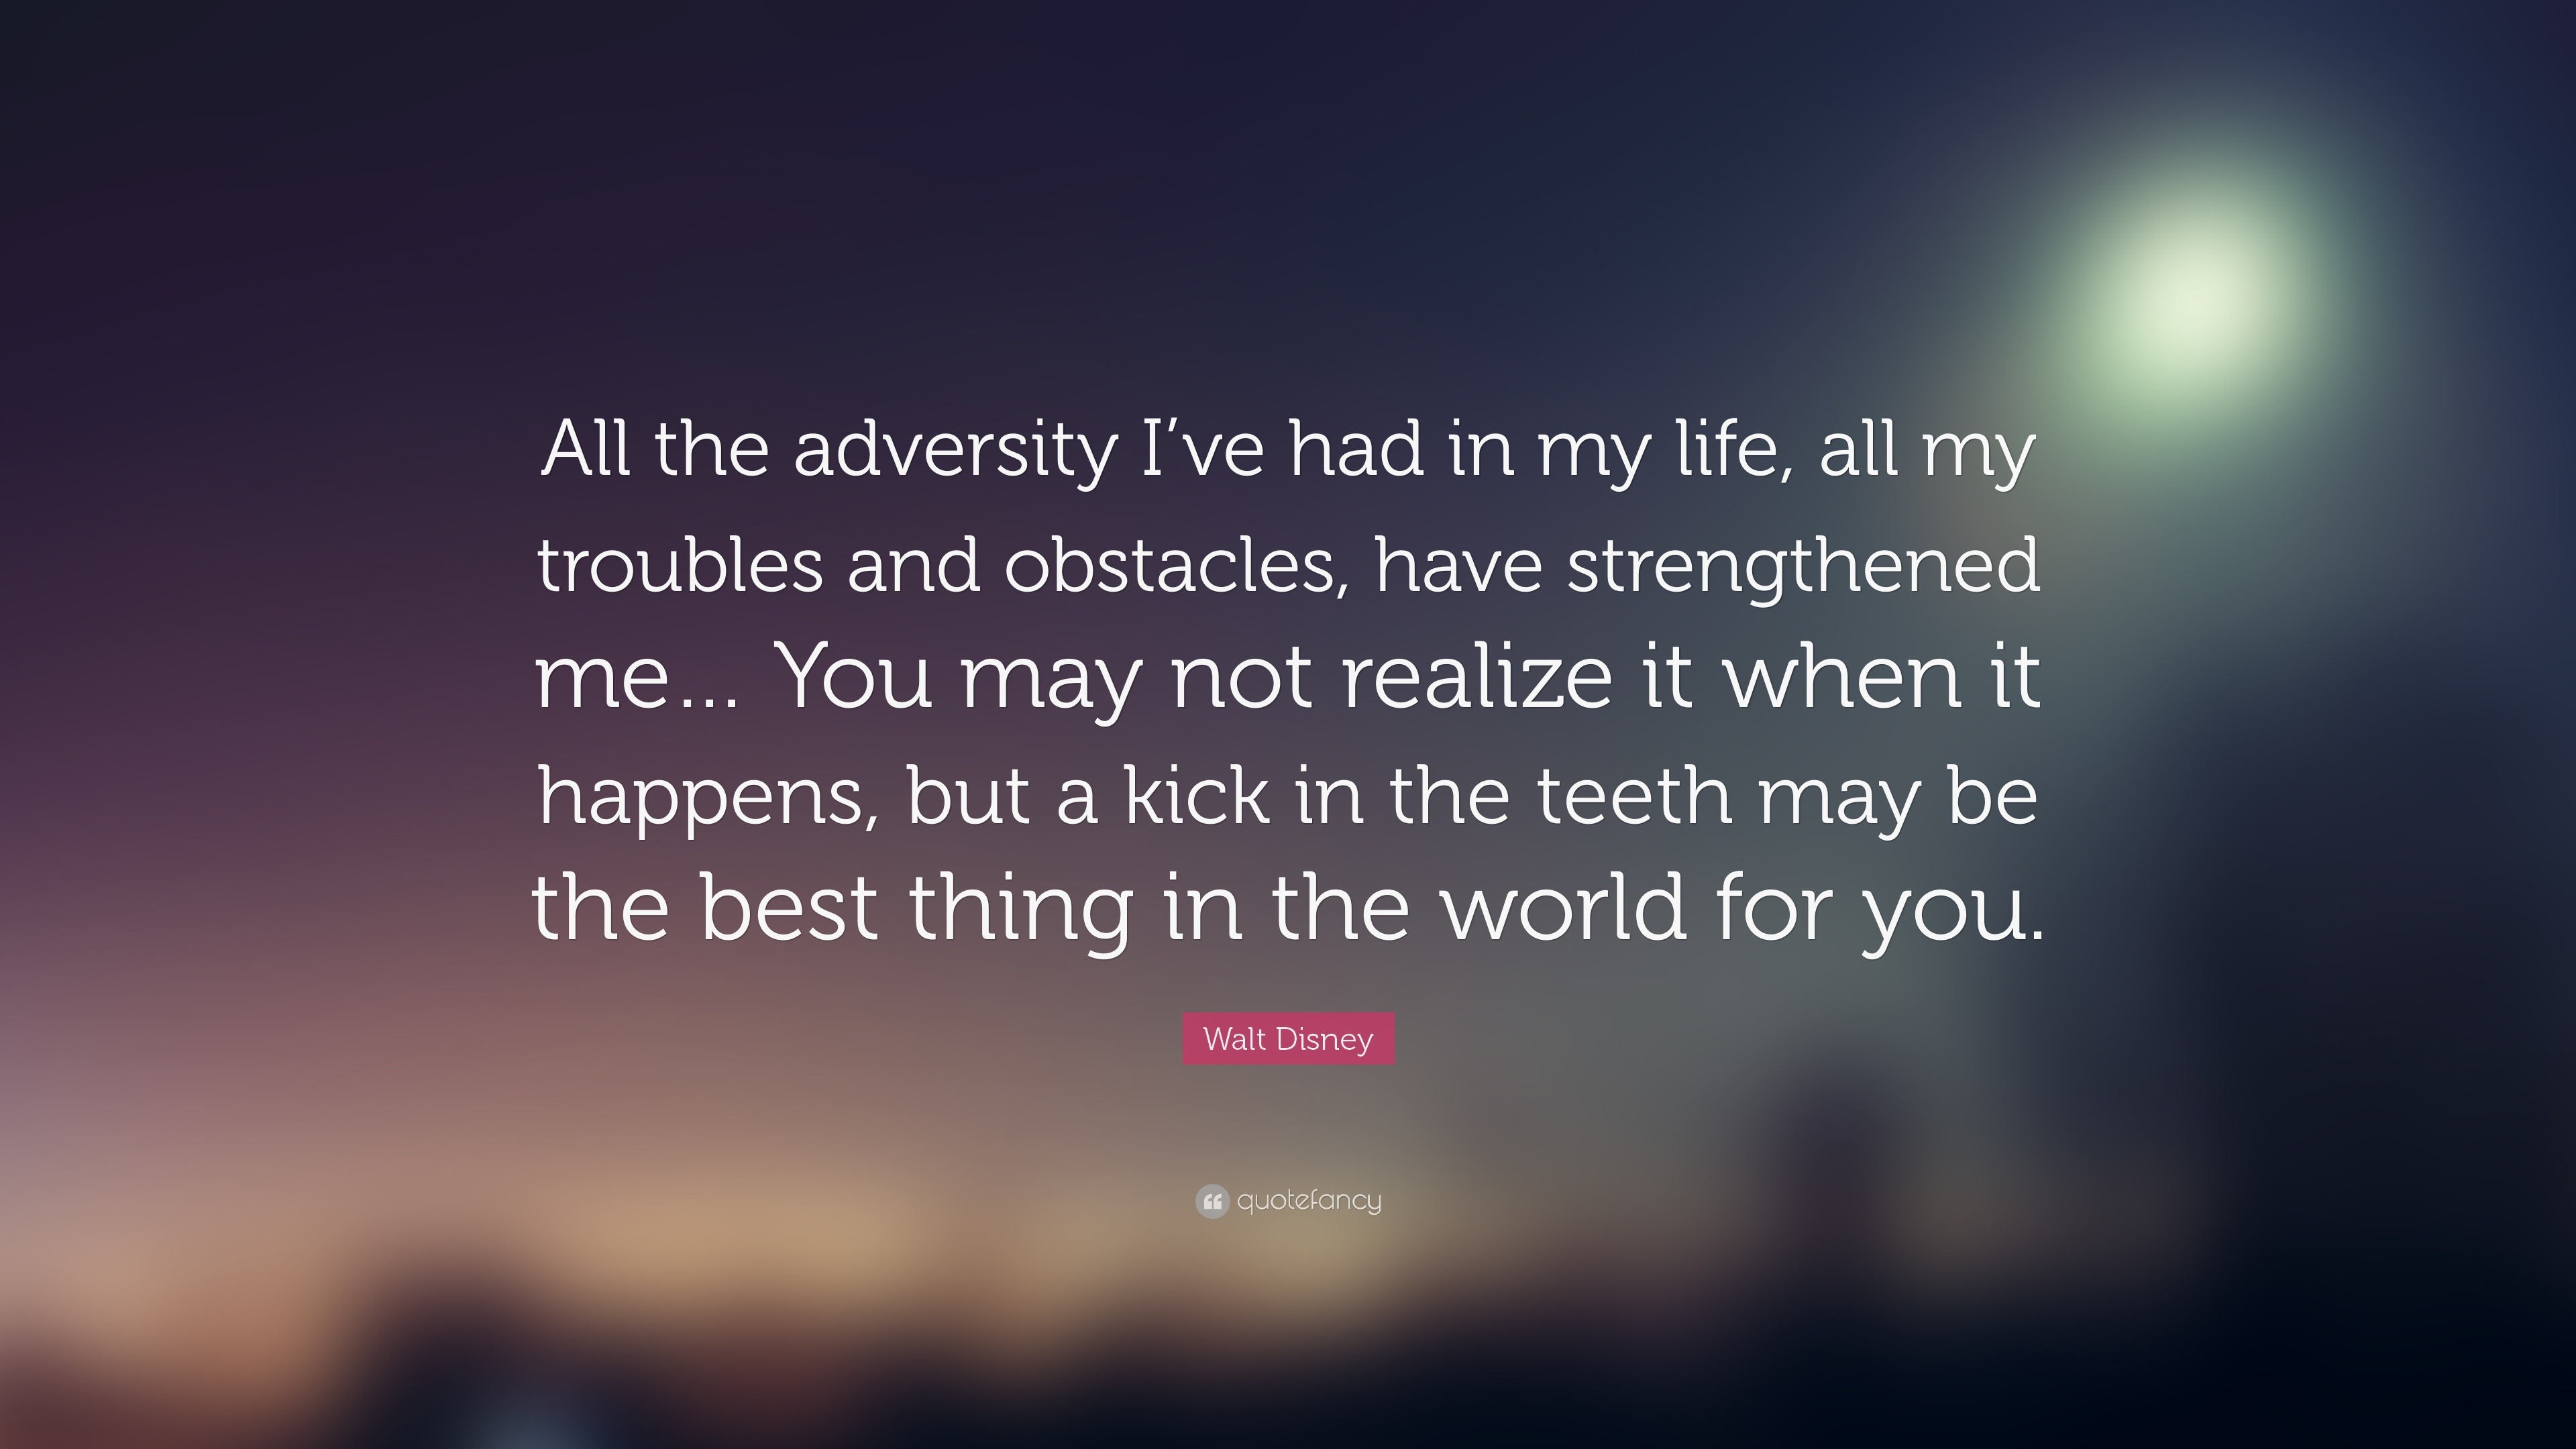 Walt Disney Quote “All the adversity I’ve had in my life